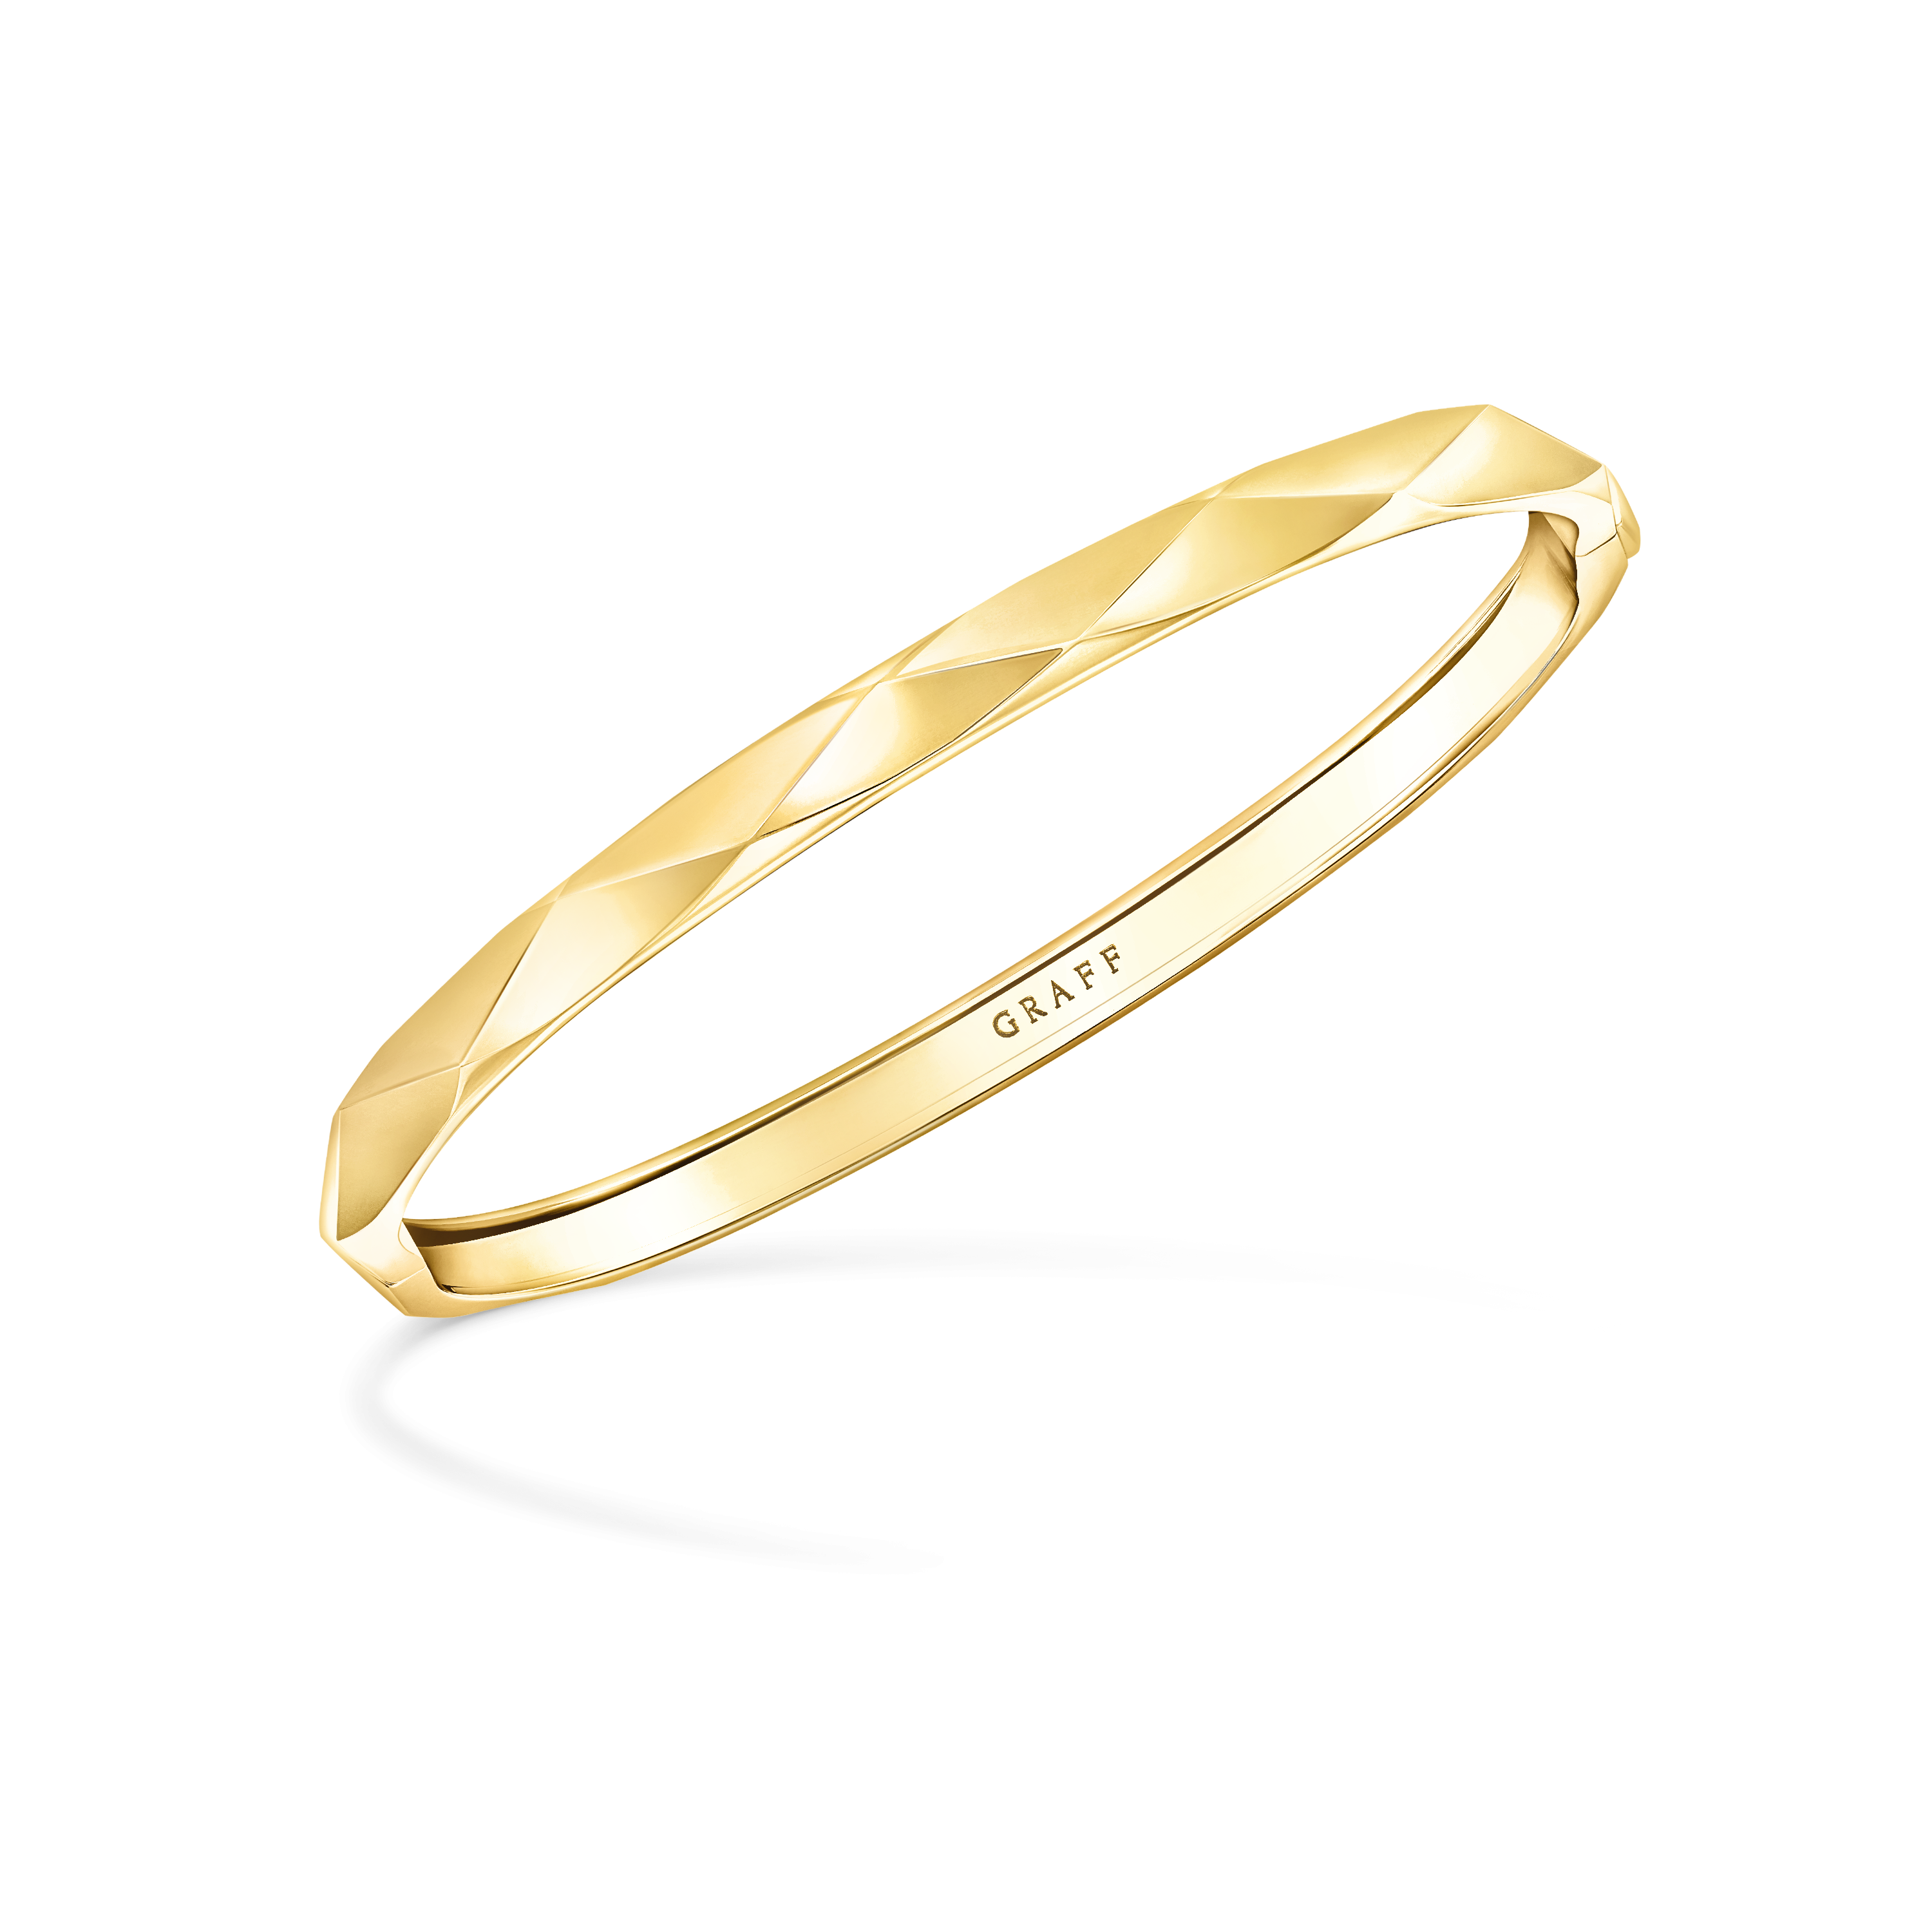 Image of Laurence Graff Signature Bangle in Yellow Gold